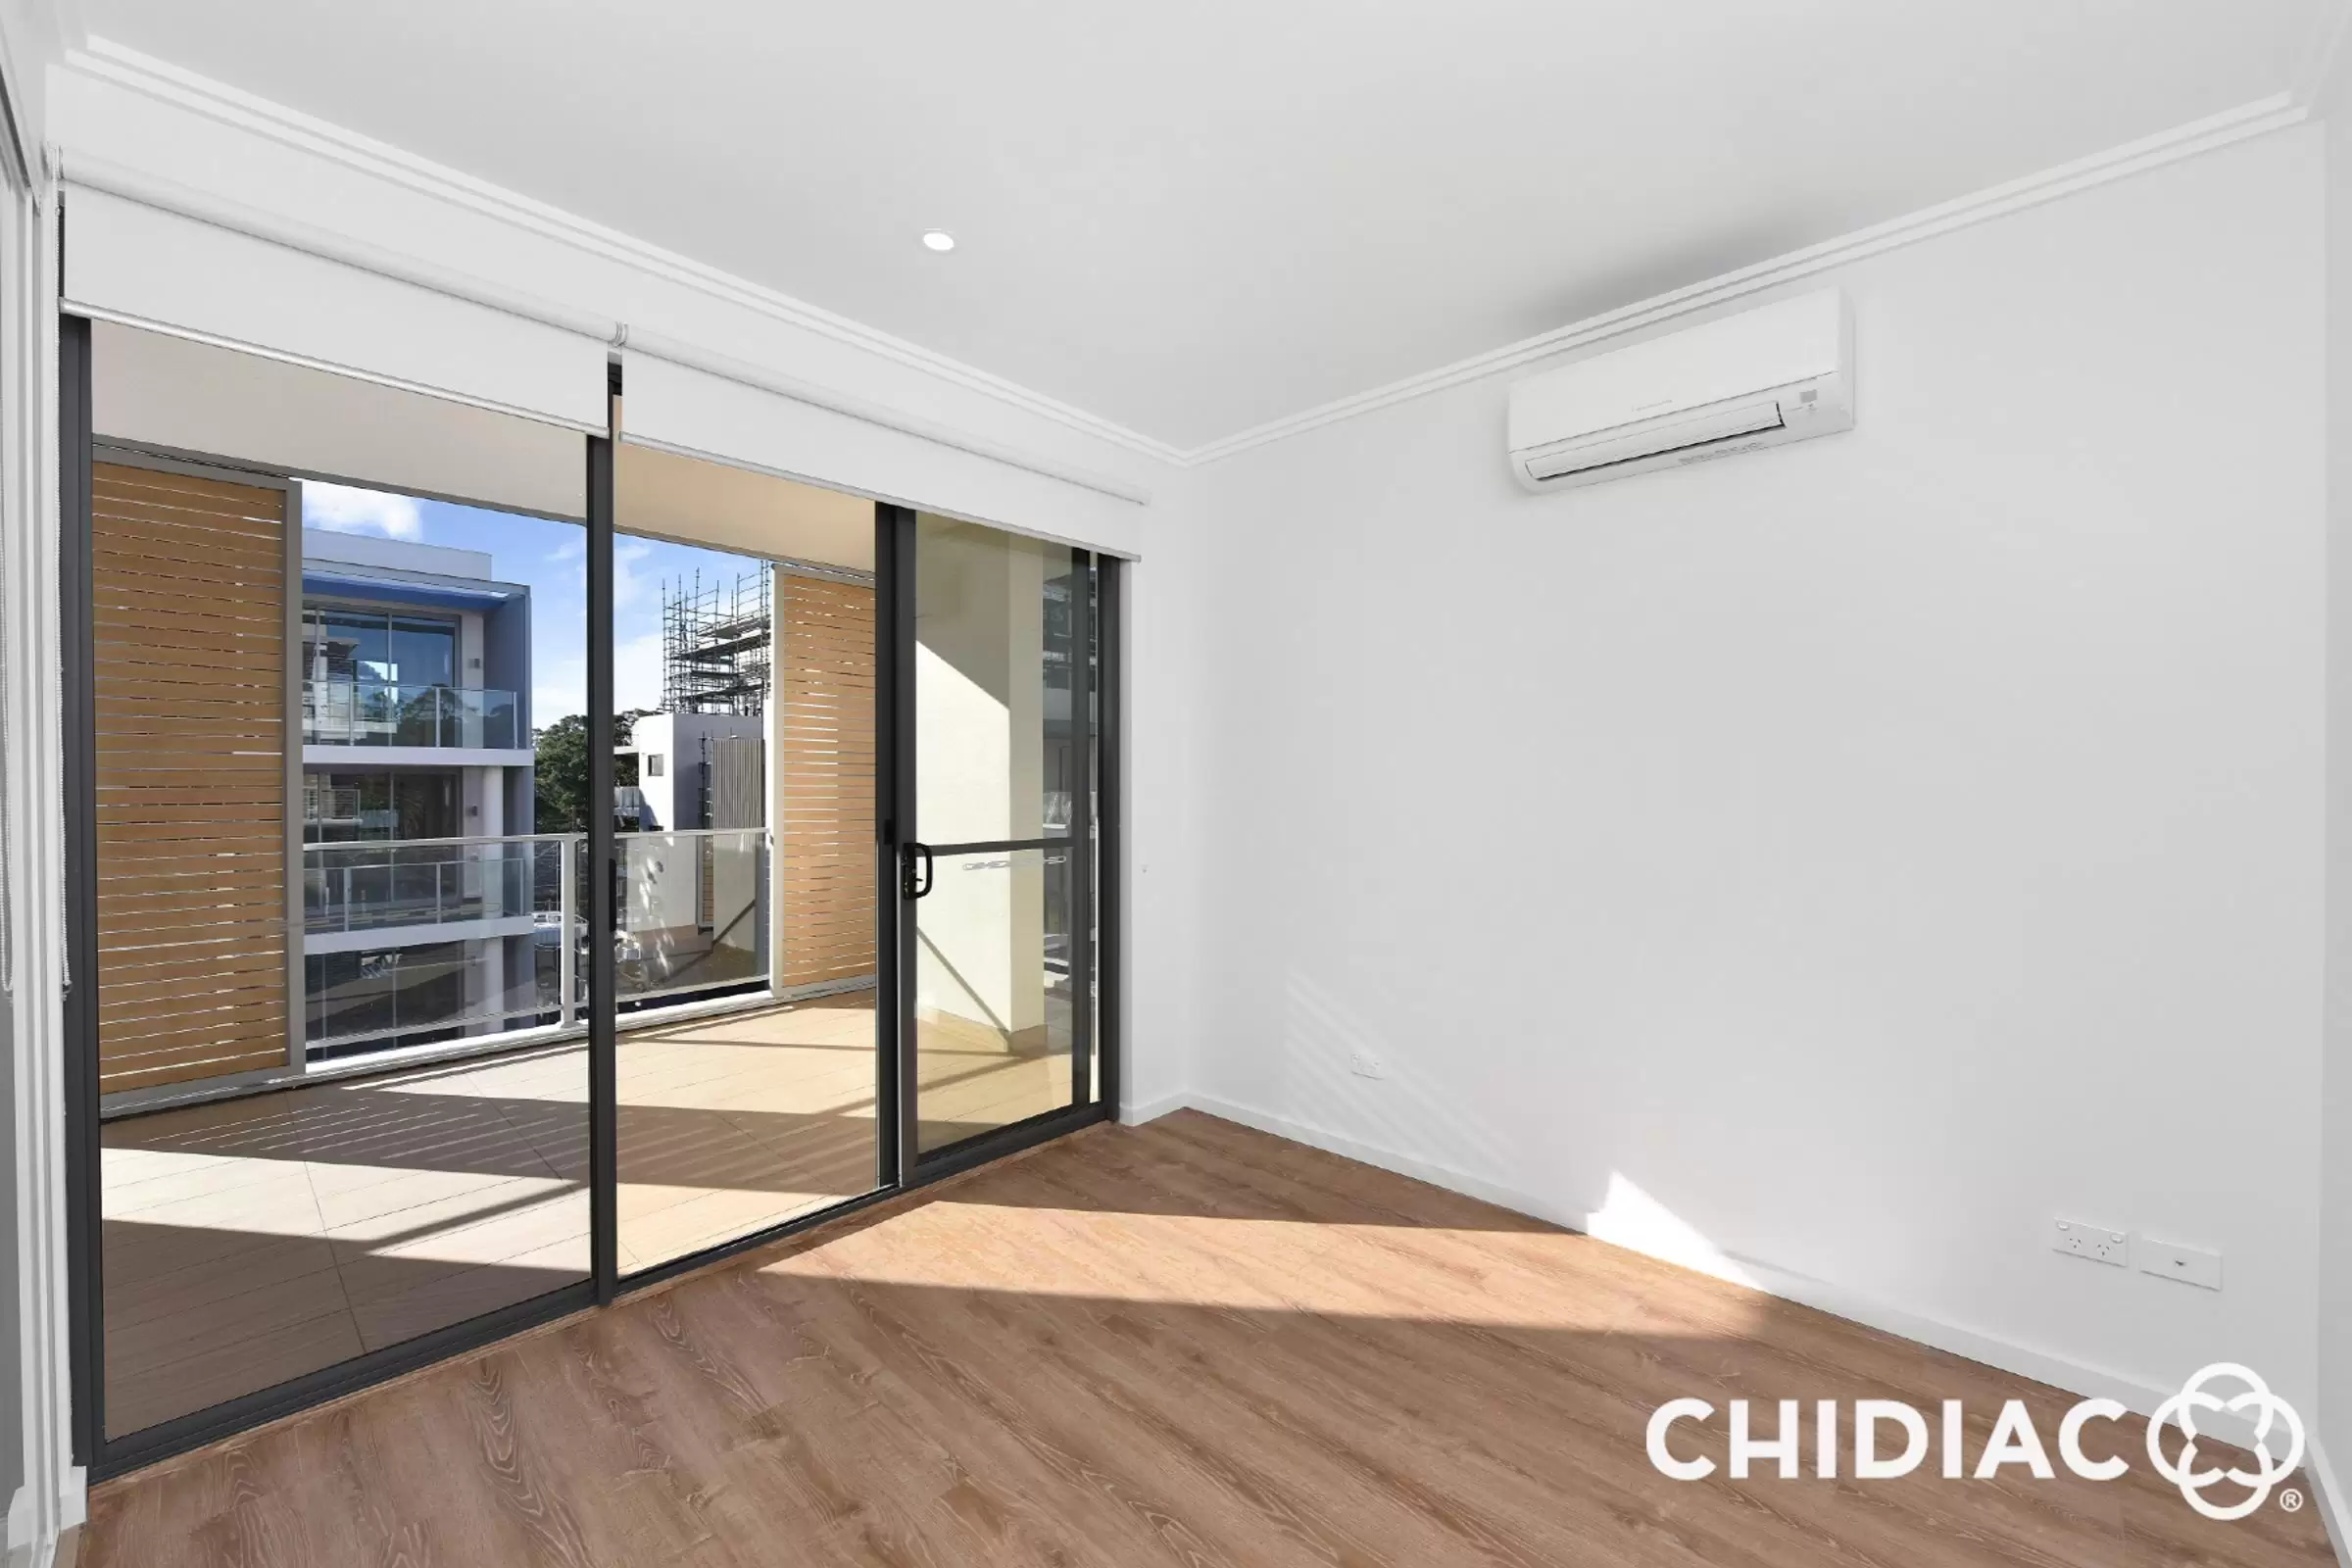 B203/18-22 Carlingford Road, Epping Leased by Chidiac Realty - image 4